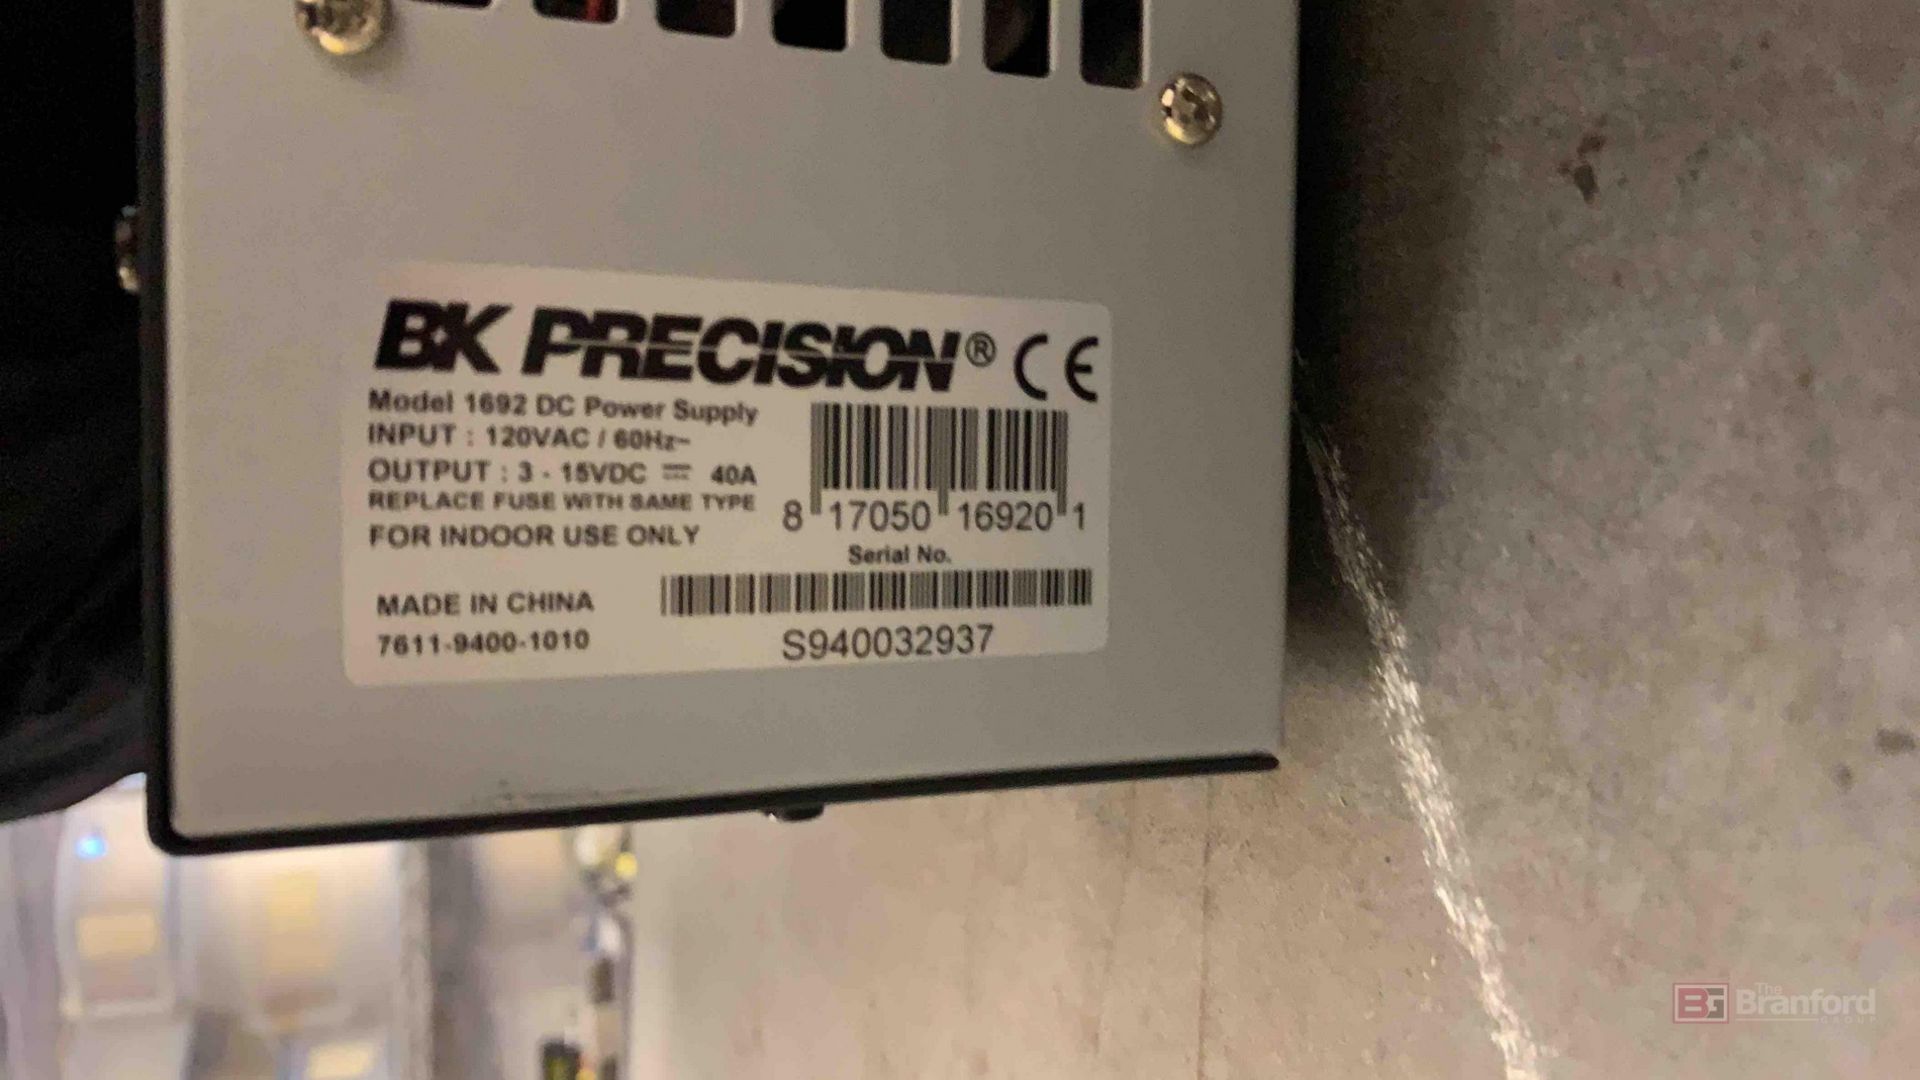 BK Precision 1692 DC power supply - Image 3 of 3